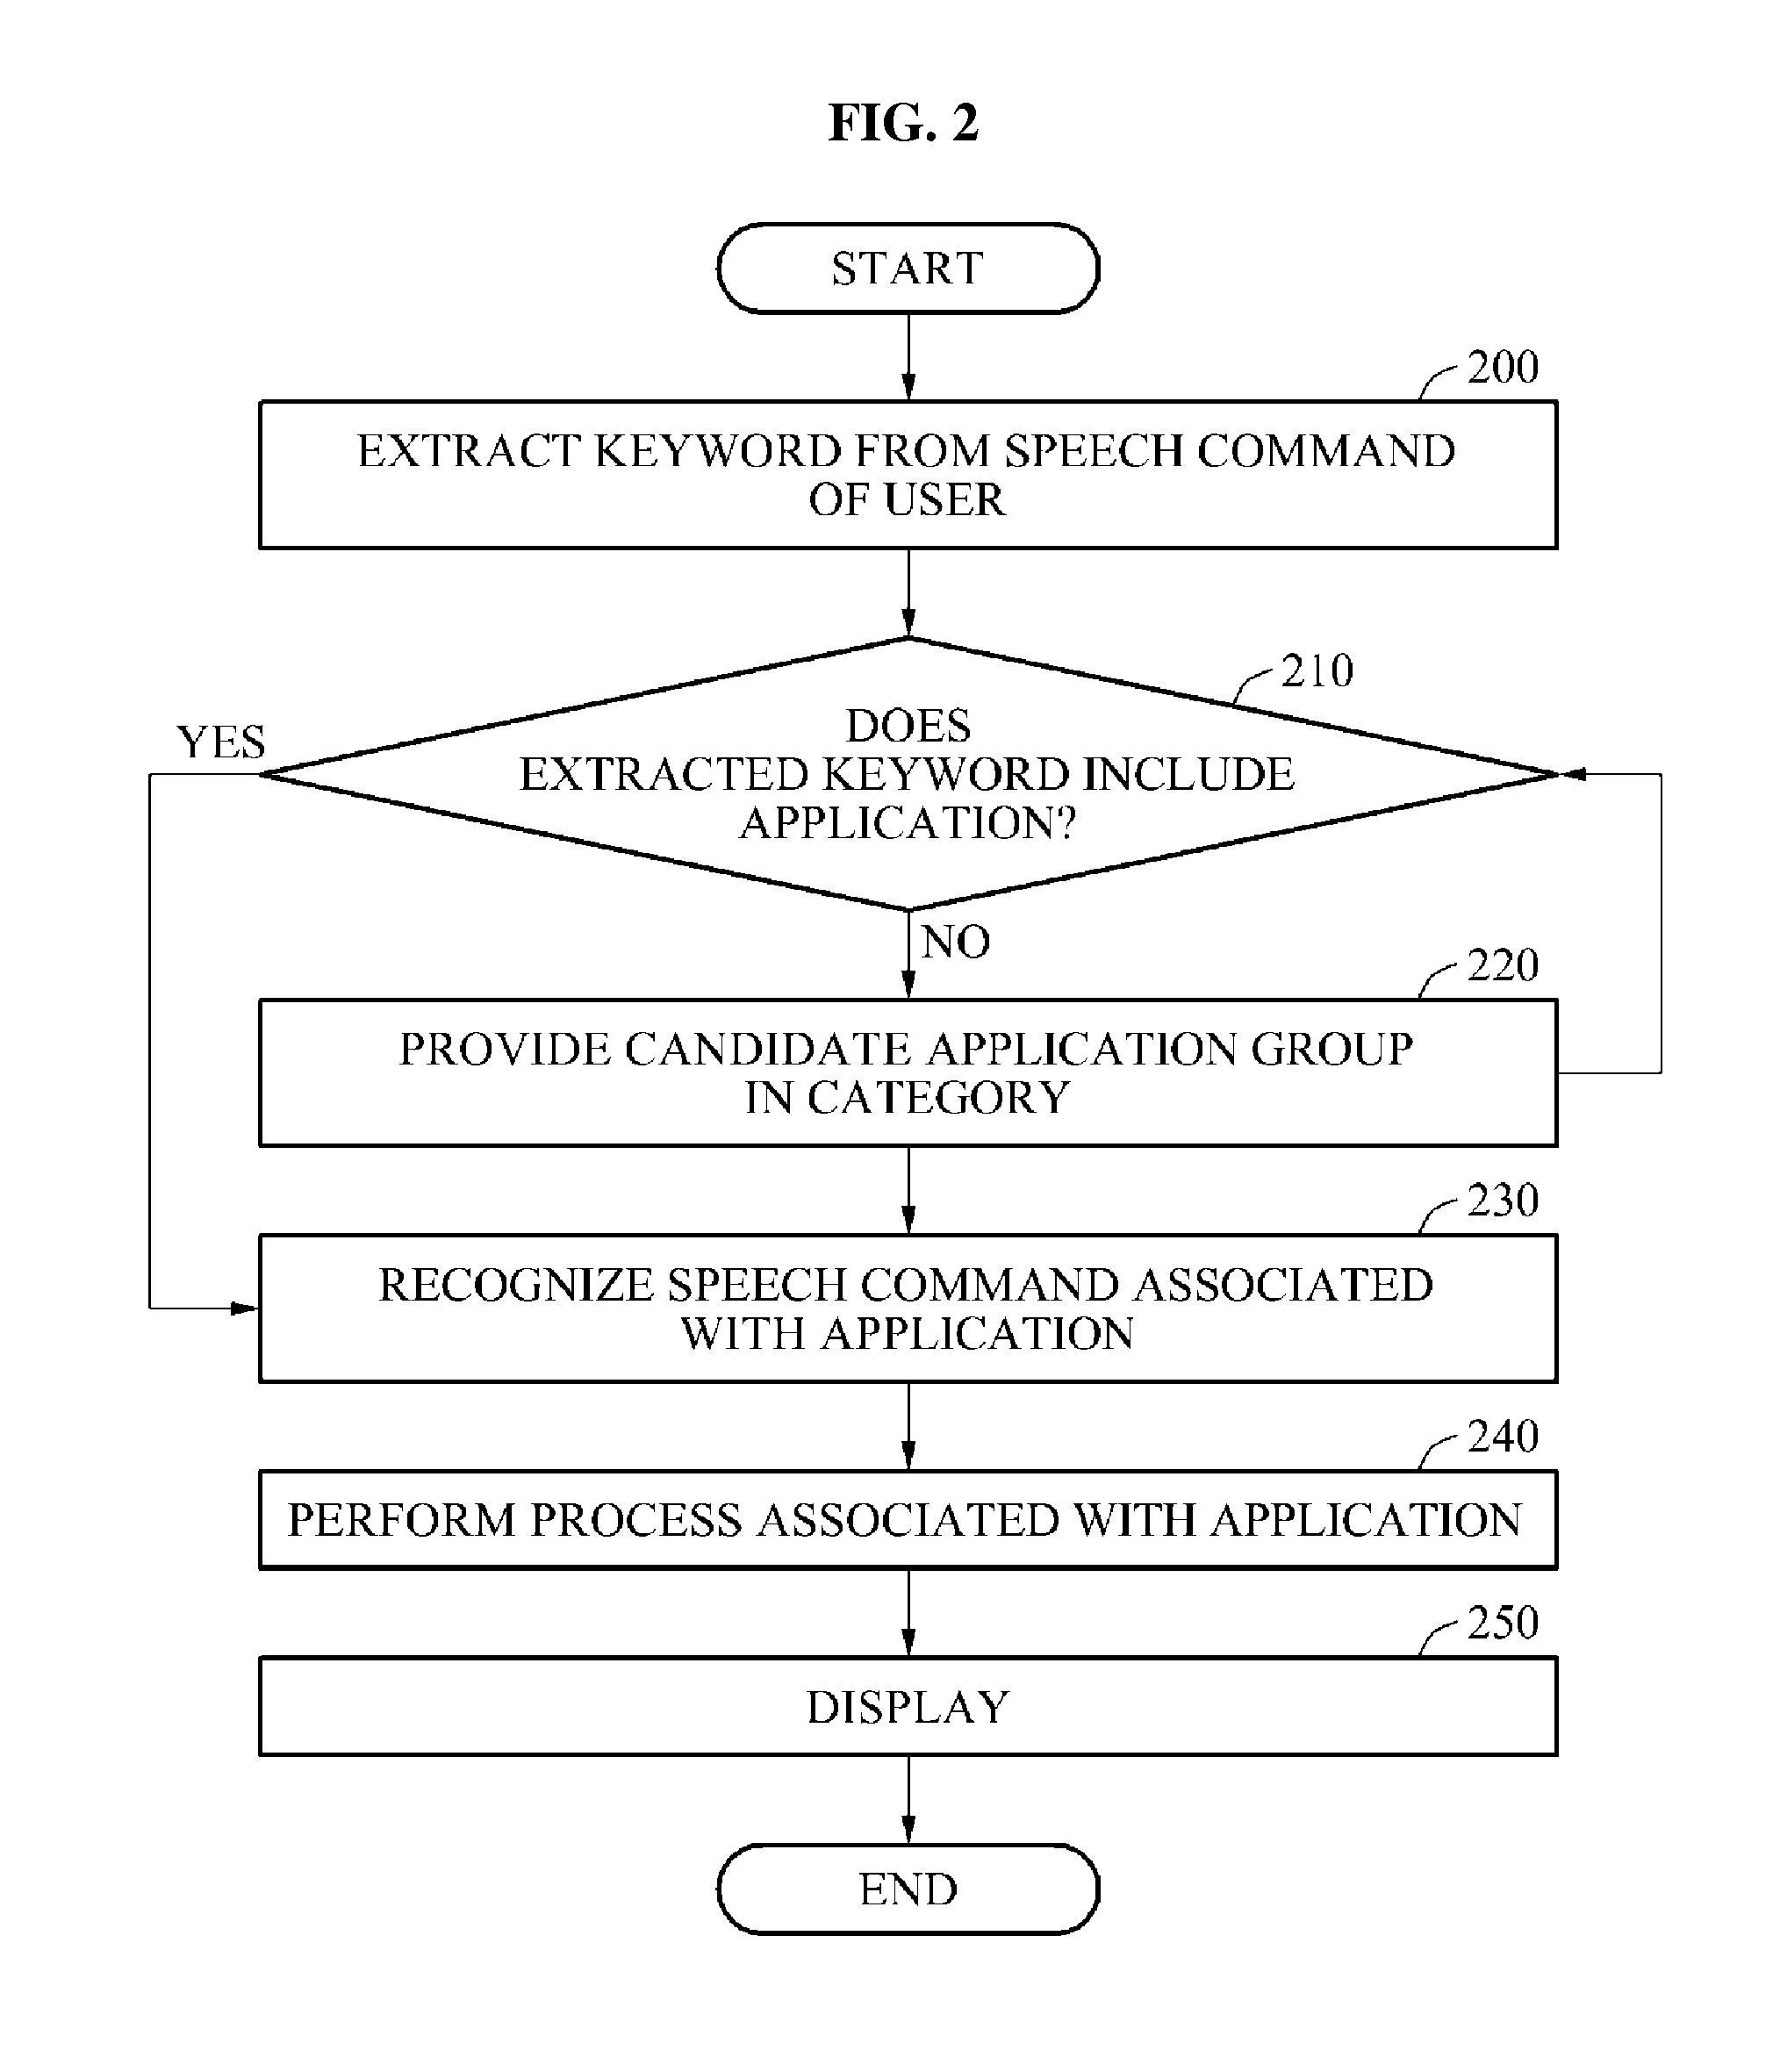 Multilevel speech recognition method and apparatus